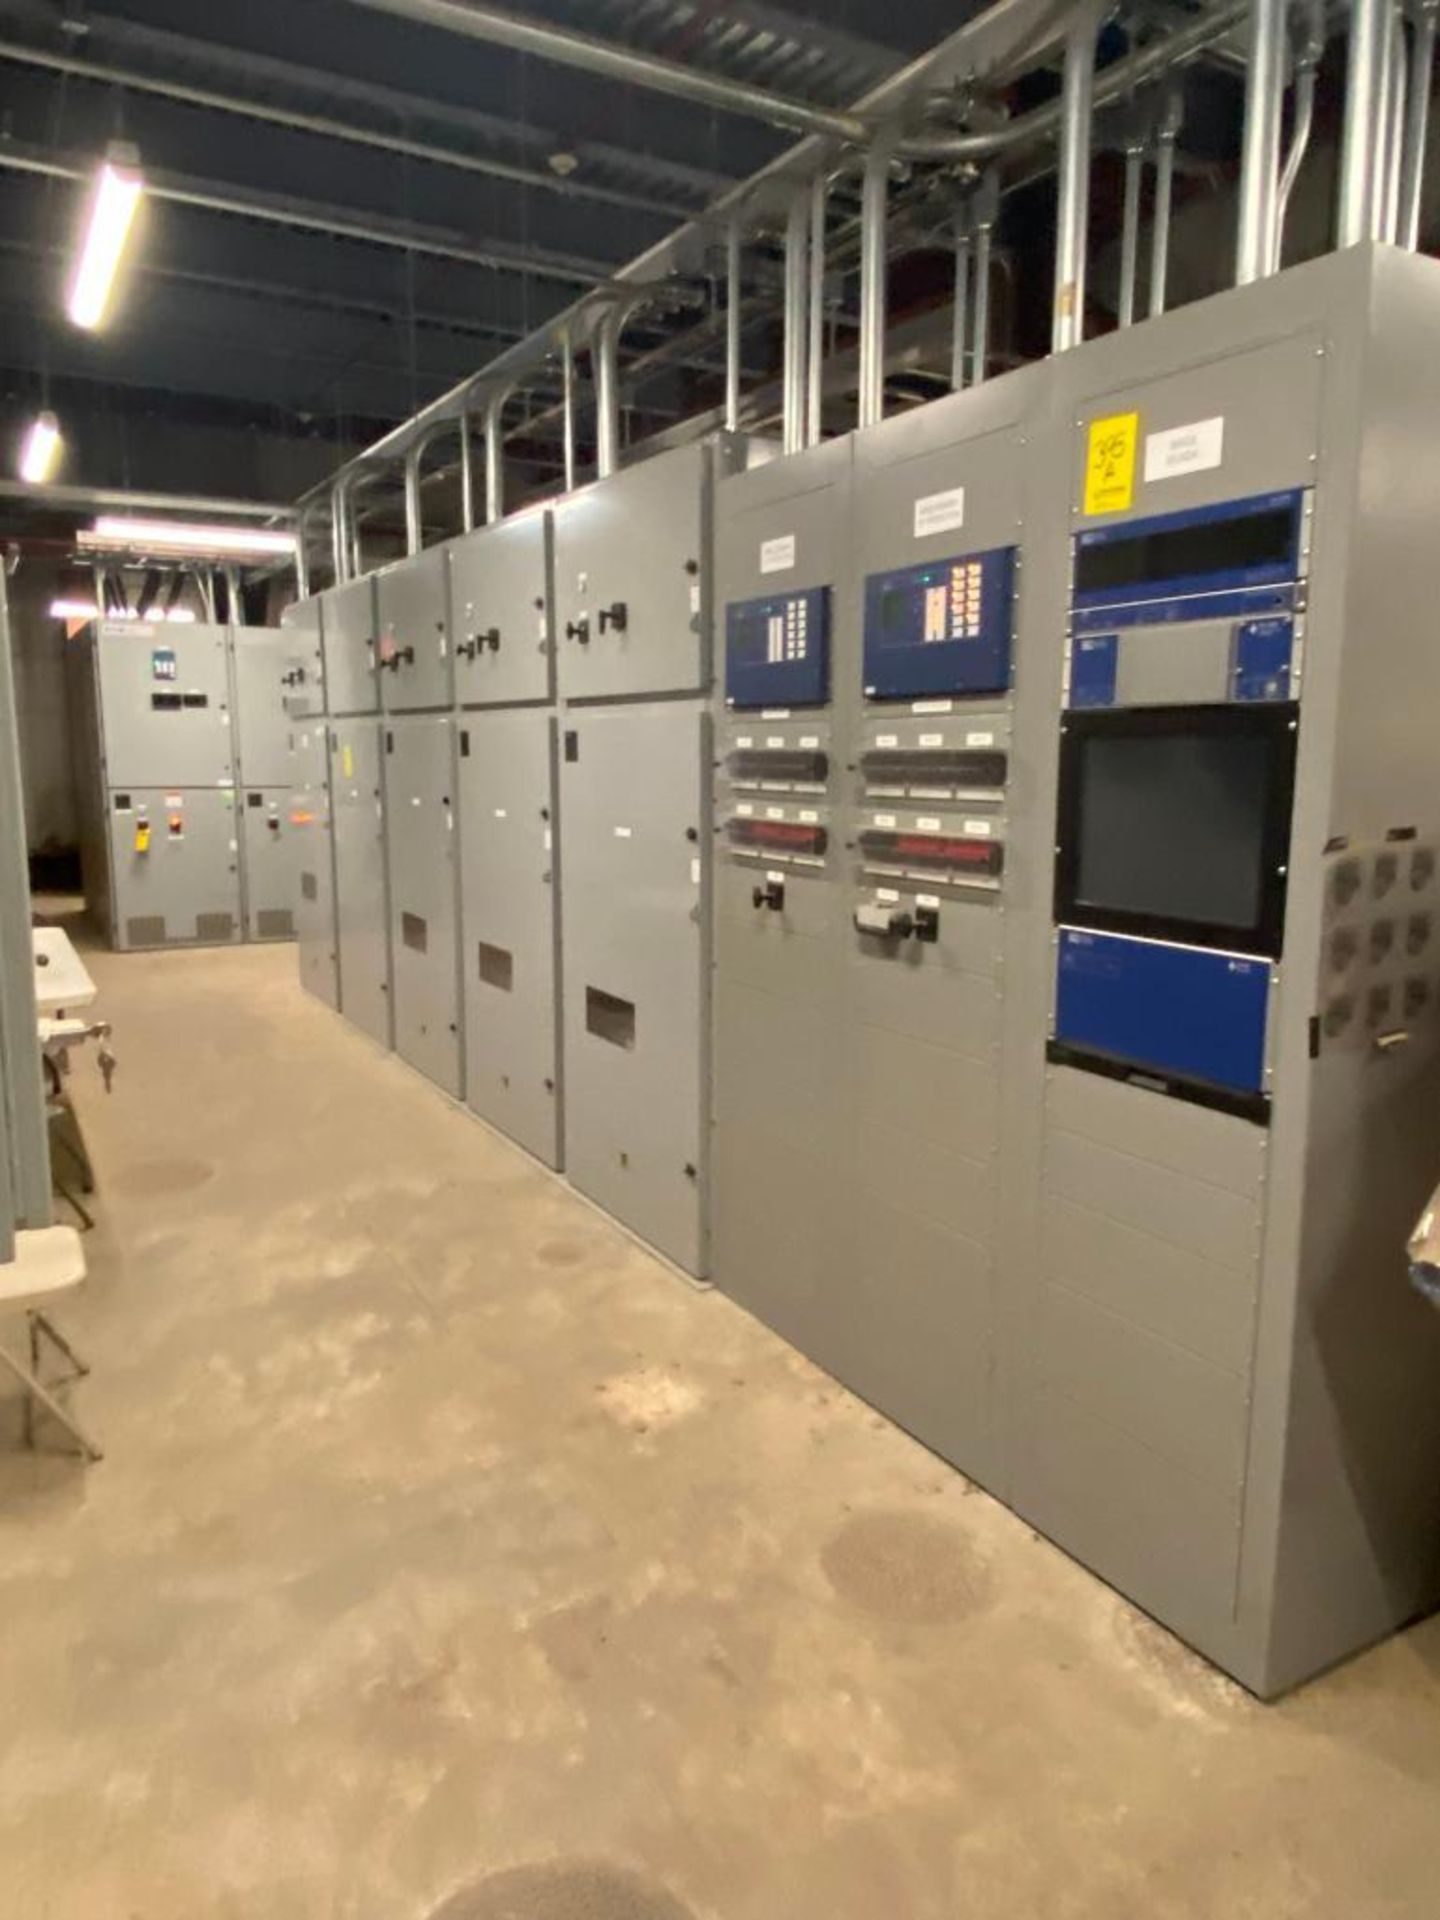 Eaton Type VCW Switchgear, 06/15 DMF, 60 Hz, 38 KV Max. Voltage, SO 72YC395, (5) Sections (Buyer mus